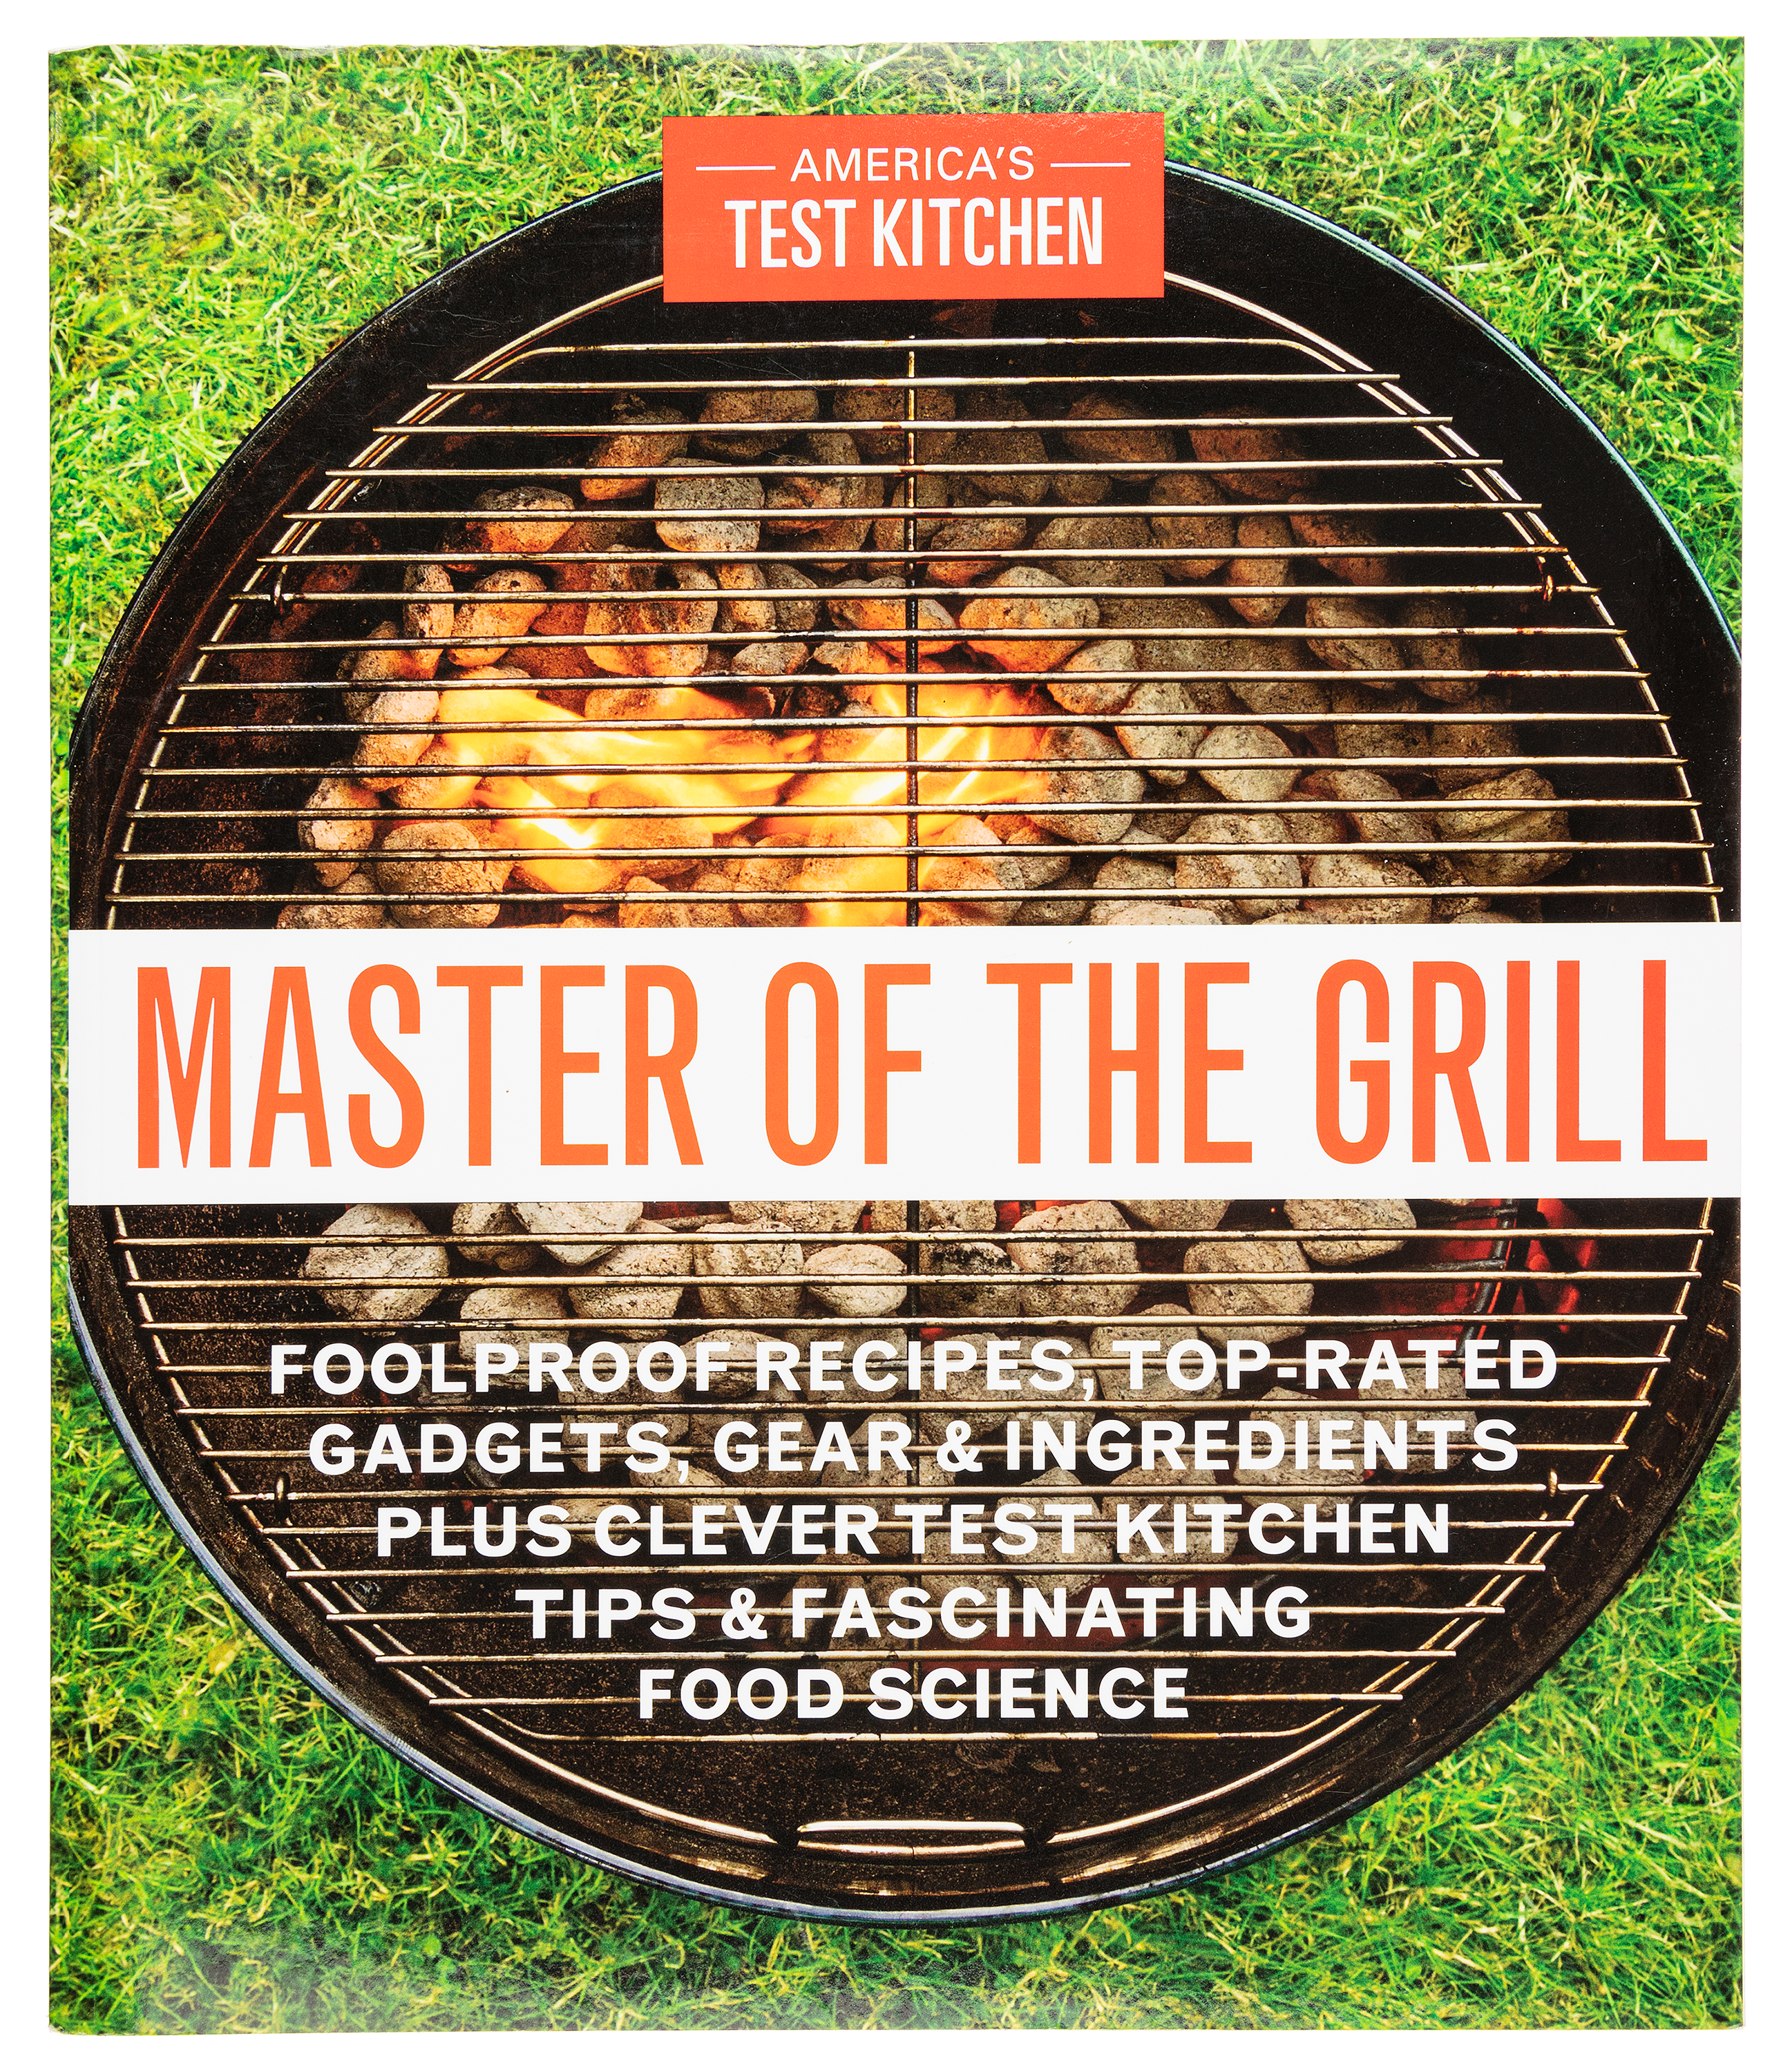 Master of the Grill Cookbook by America's Test Kitchen